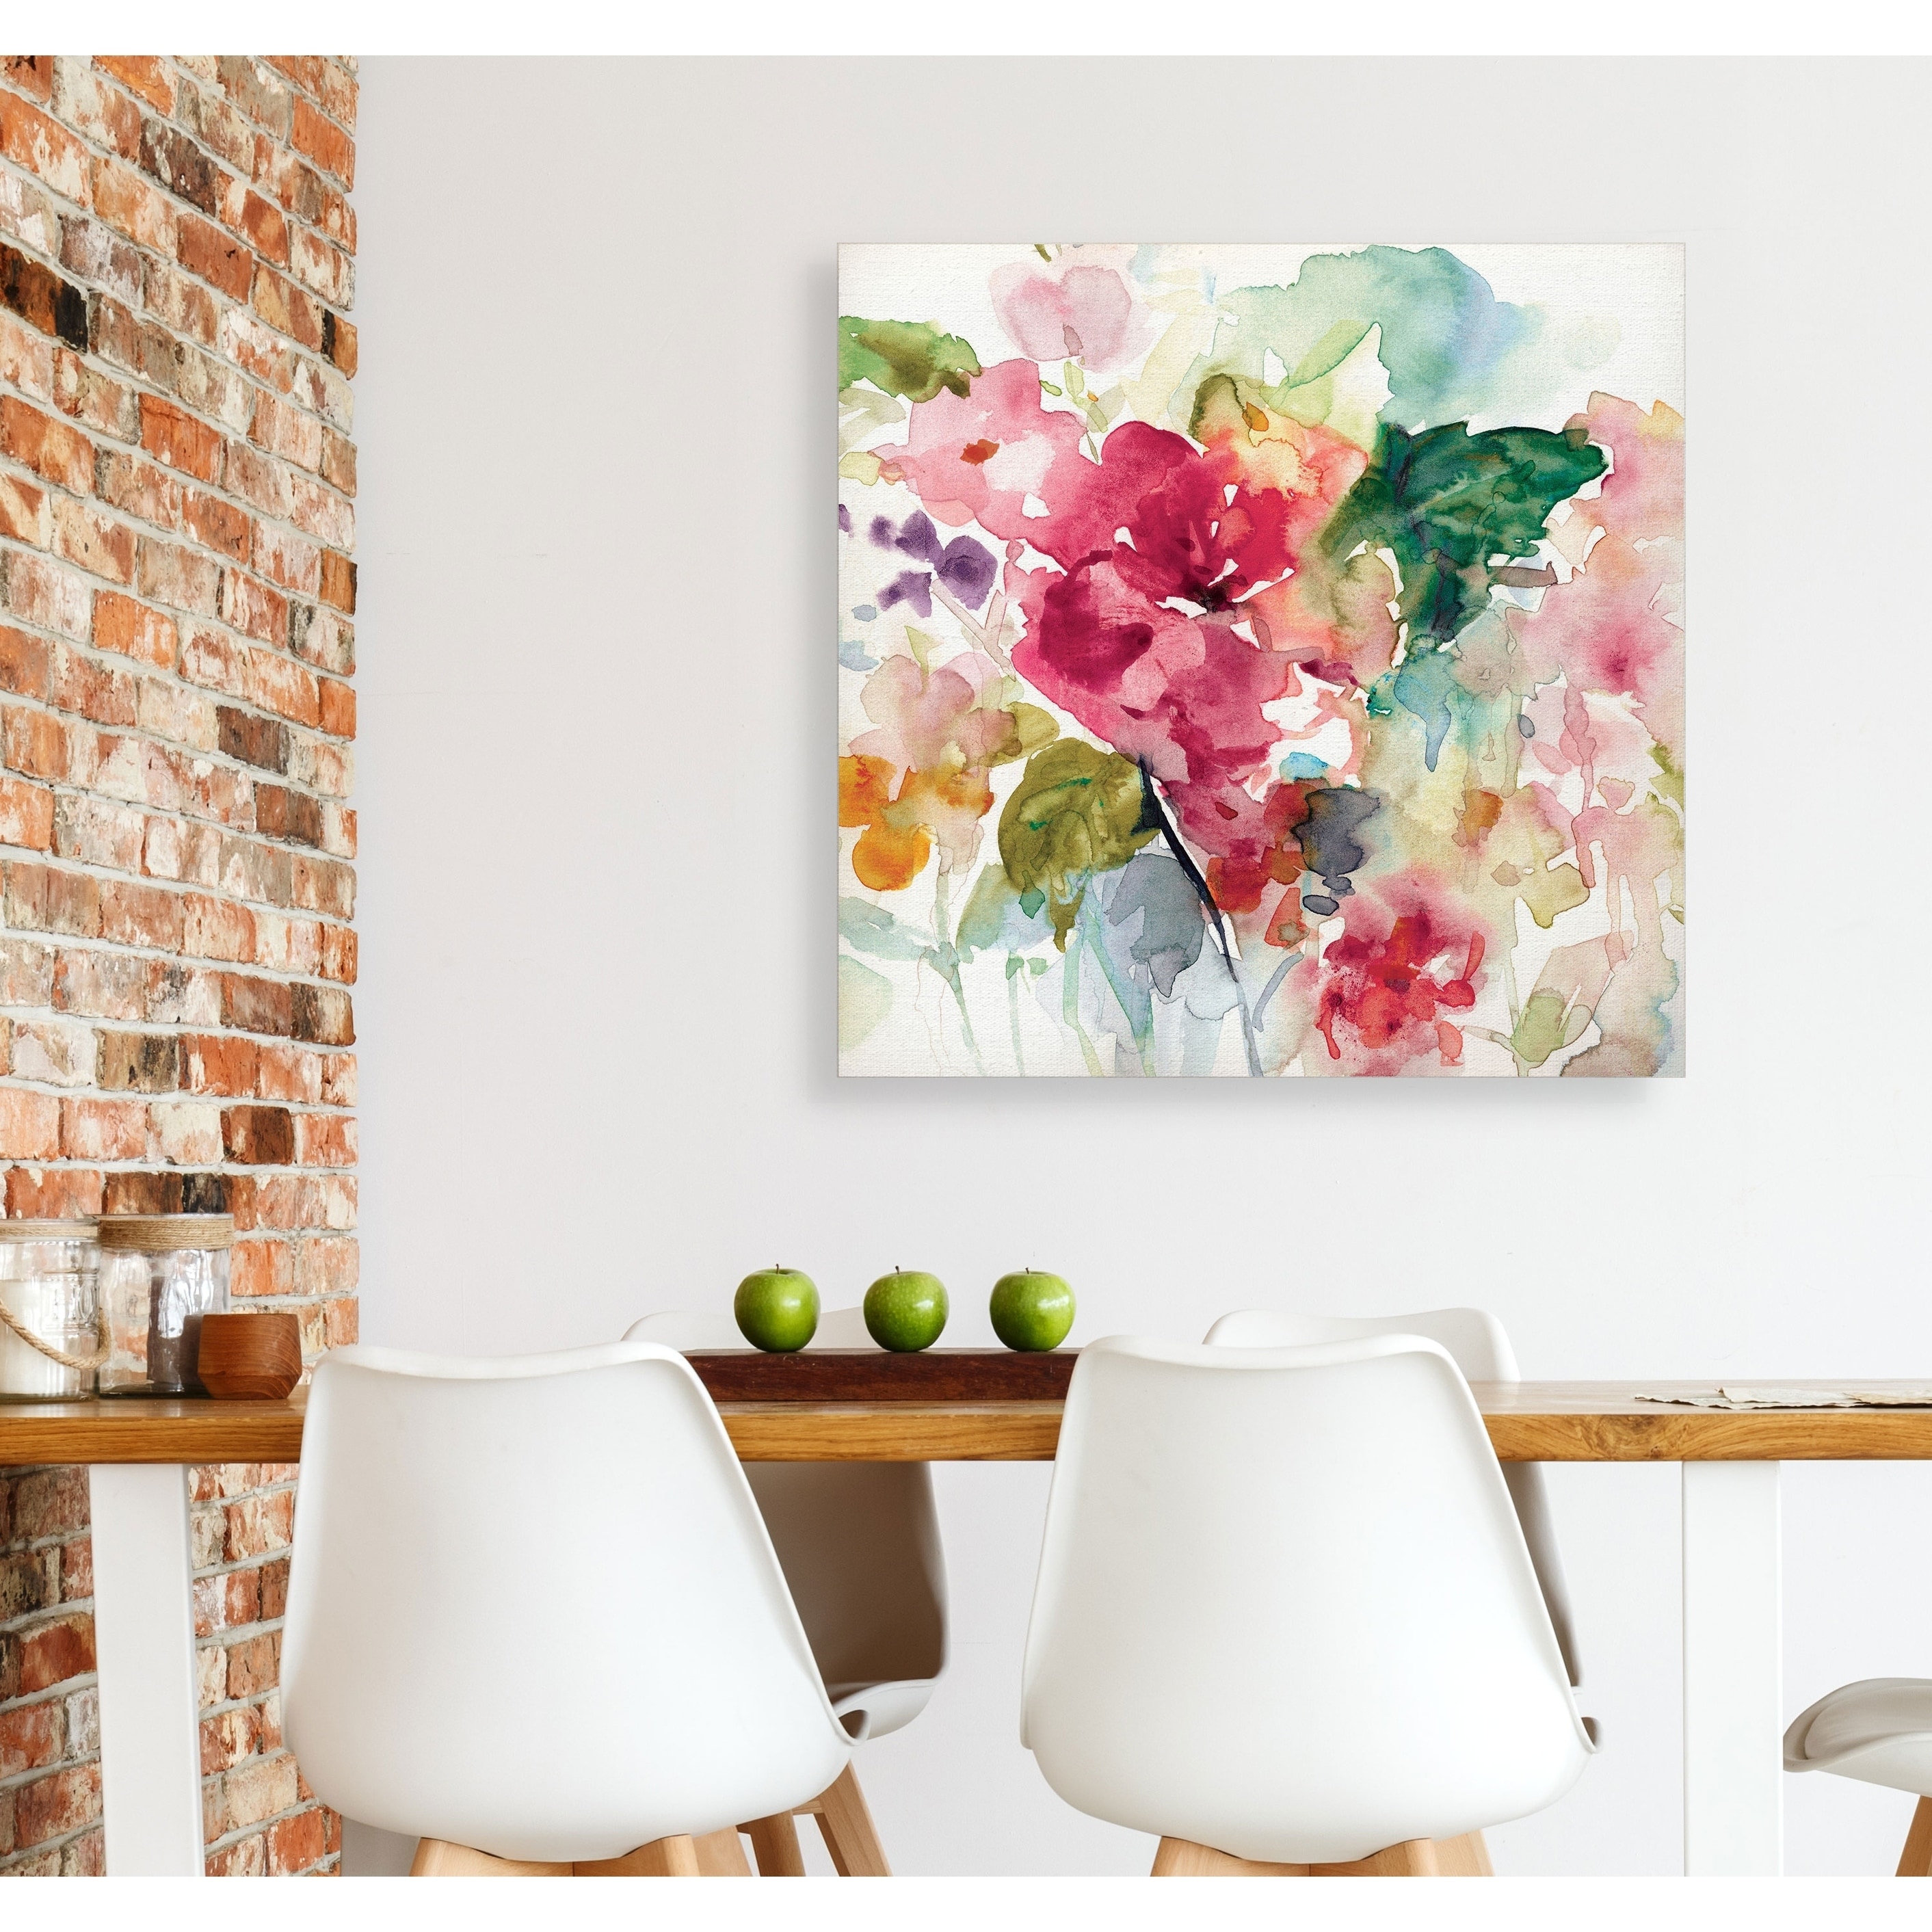 Groot bovenste presentatie Citrus Floral Punch -Gallery Wrapped Canvas - On Sale - Overstock - 24127808